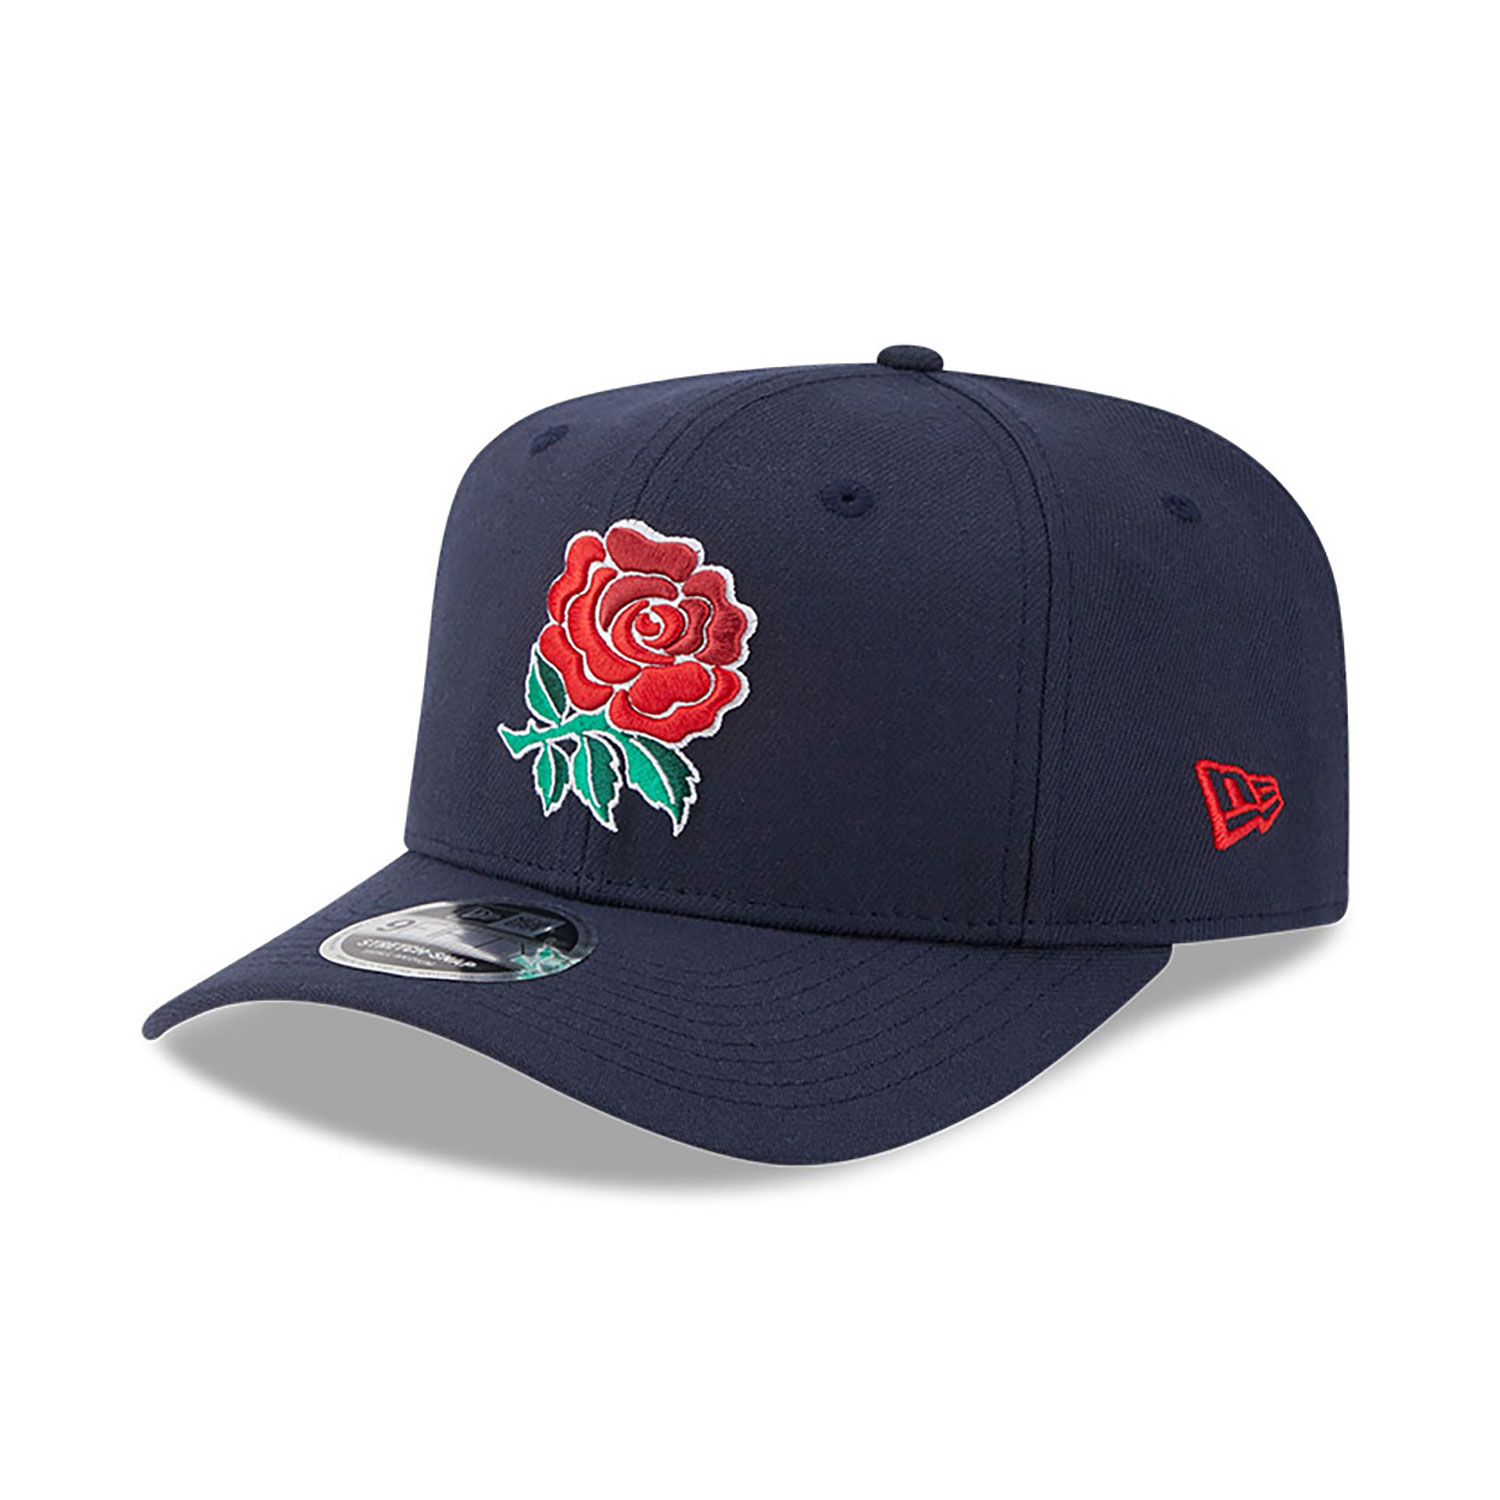 England Rugby Union Rose Navy Stretch Snap 9FIFTY Cap